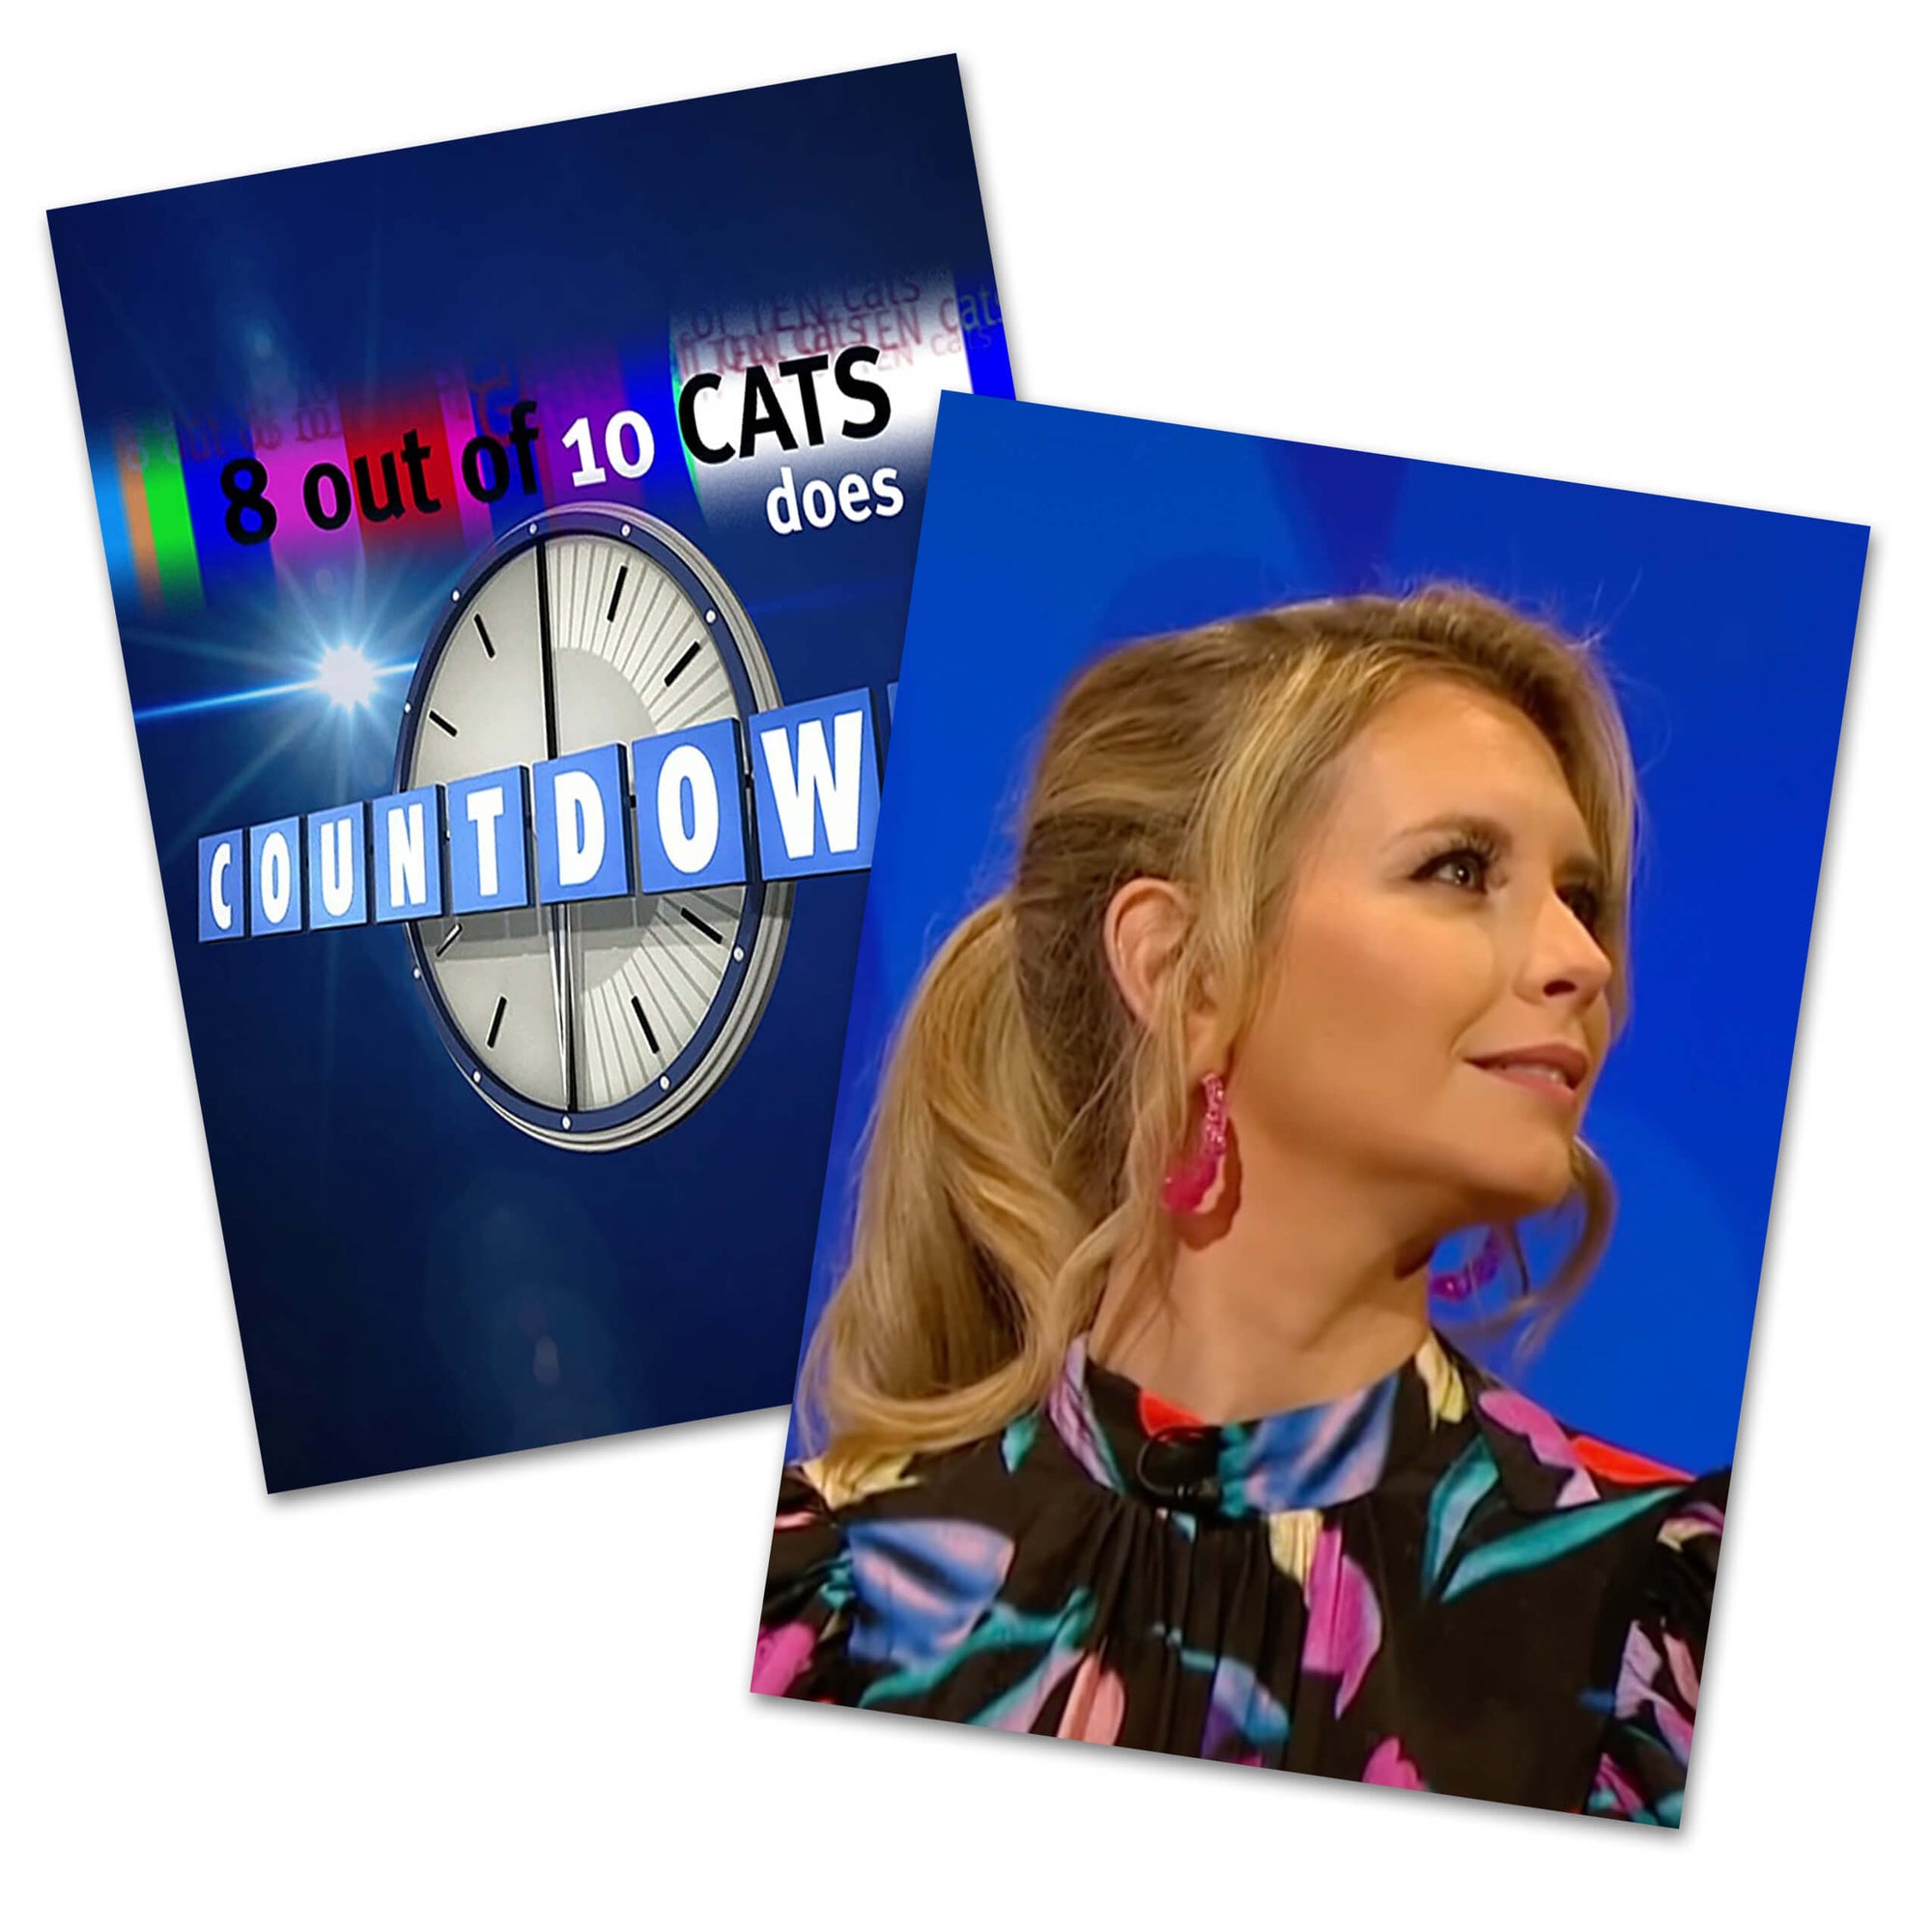 8 OUT OF 10 CATS DOES COUNTDOWN